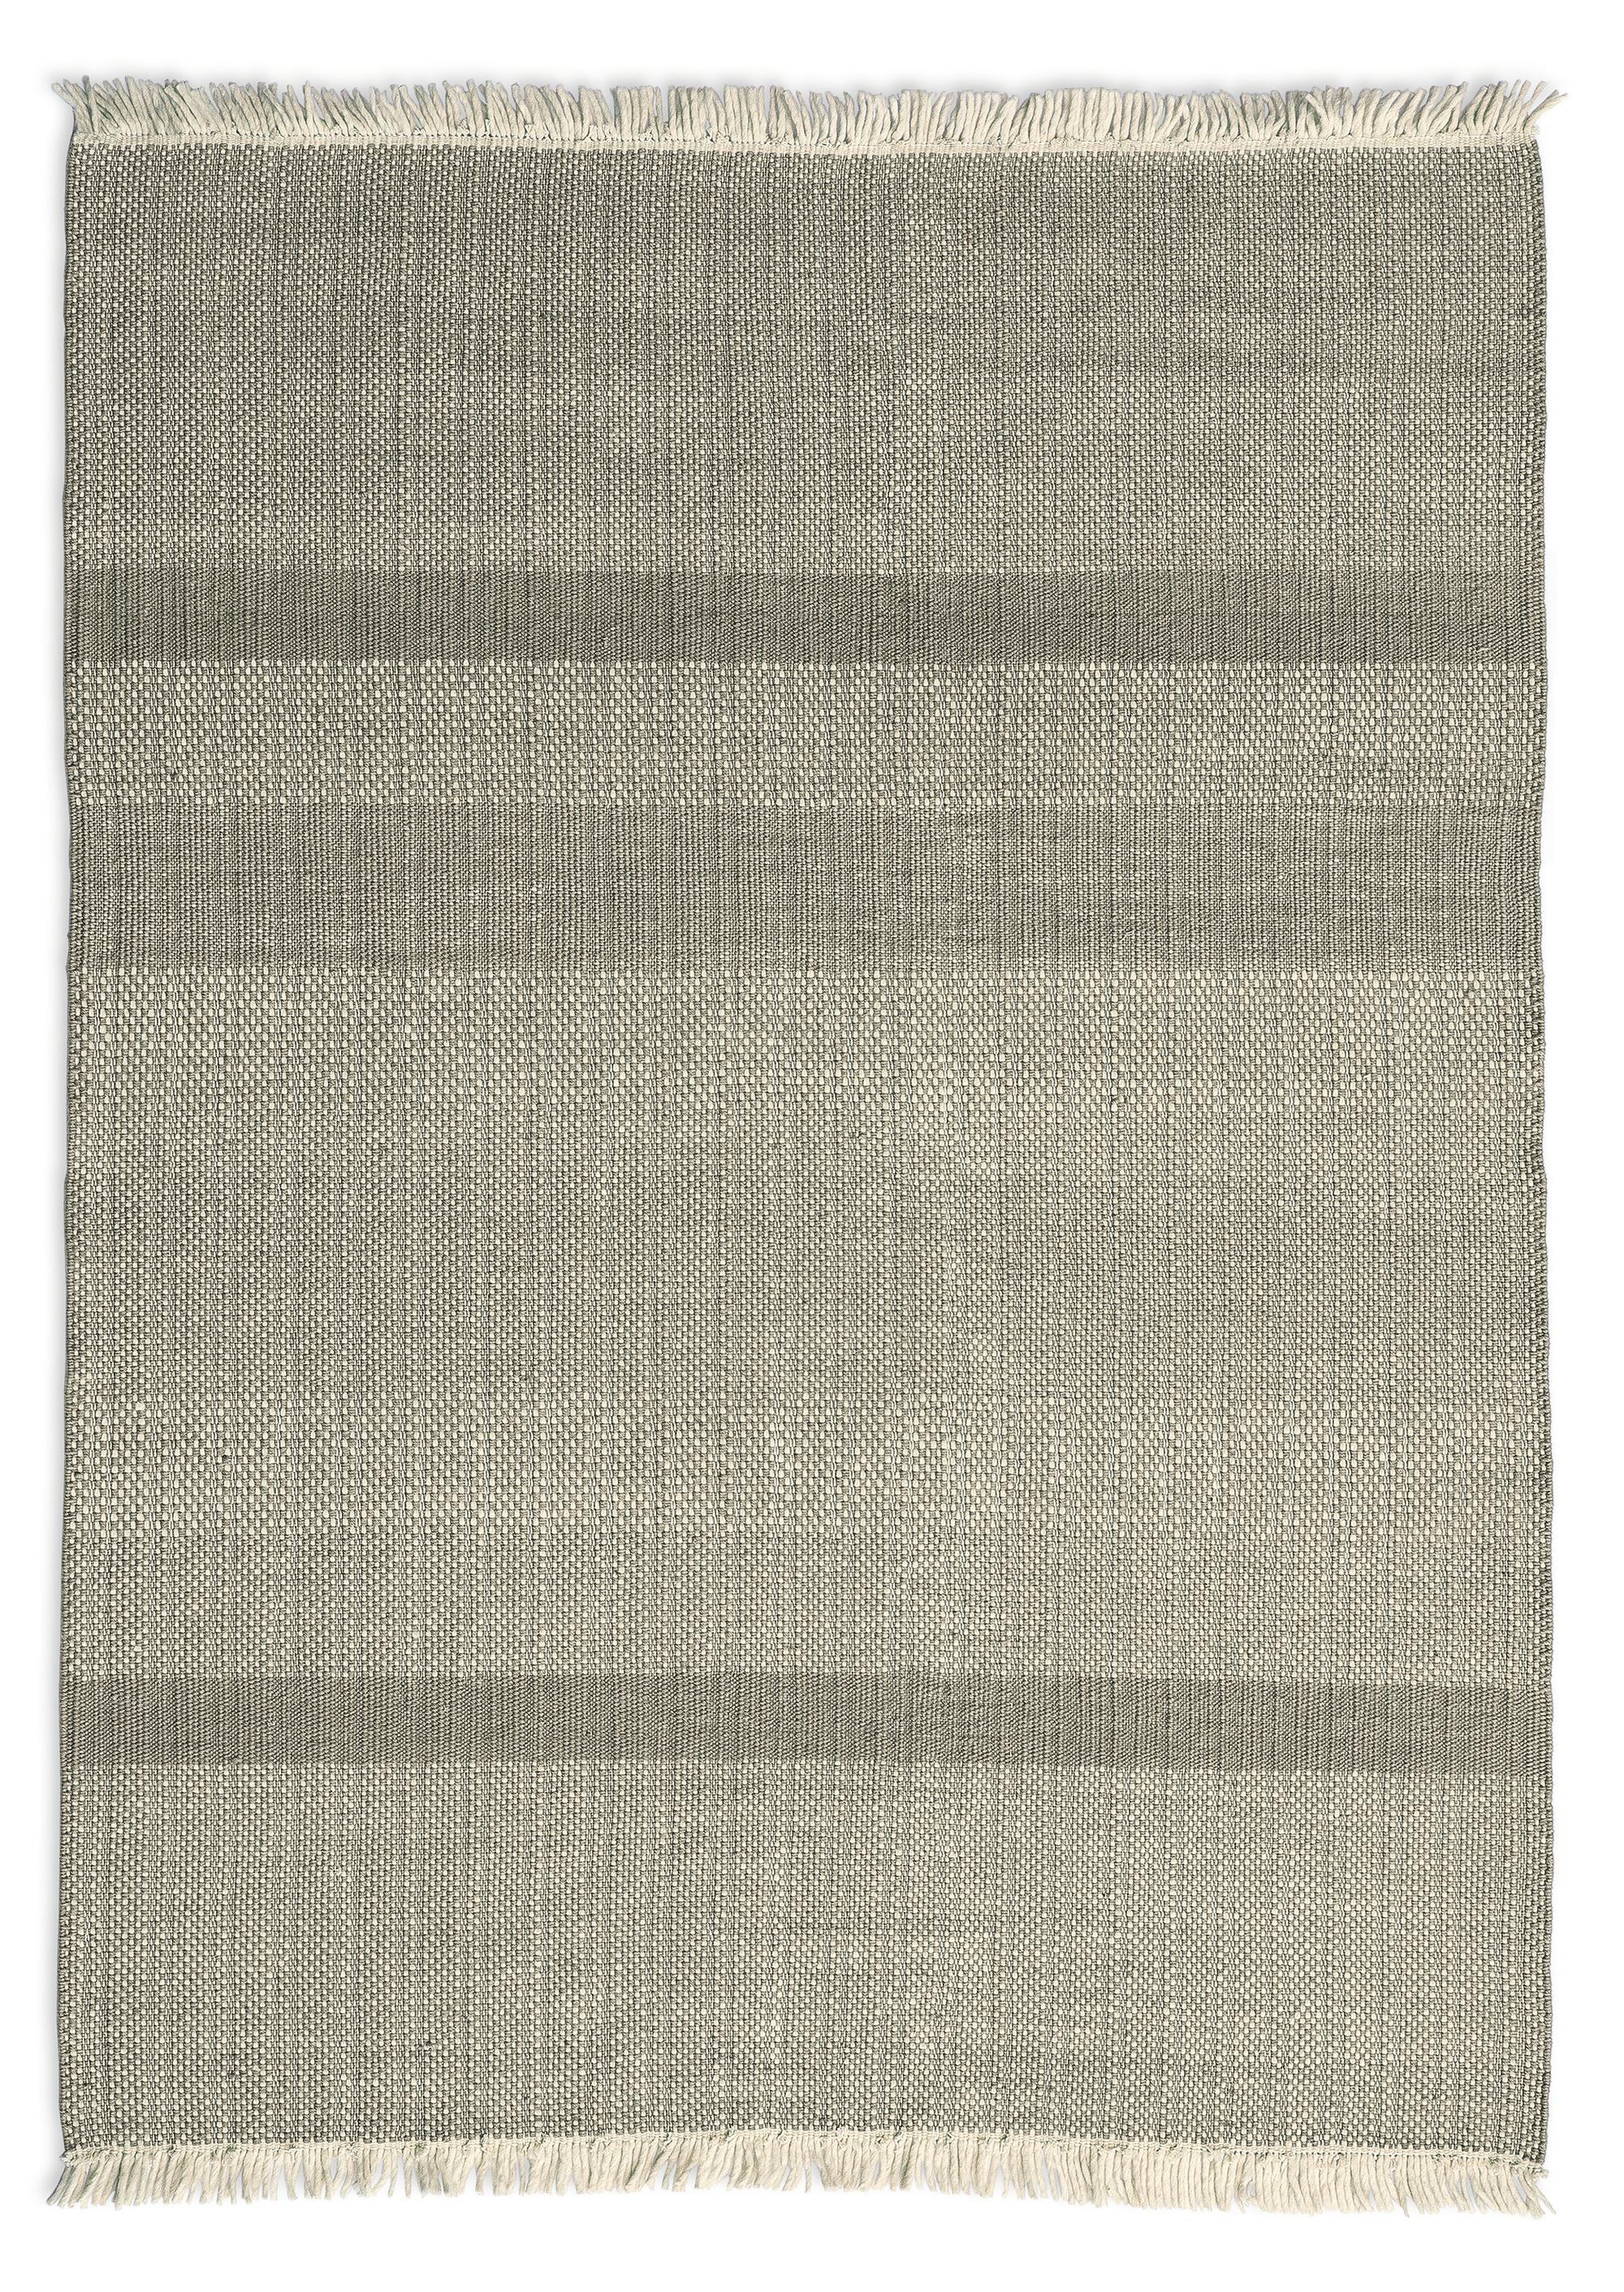 Large 'Tres Texture' Hand-Loomed Rug for Nanimarquina For Sale 3